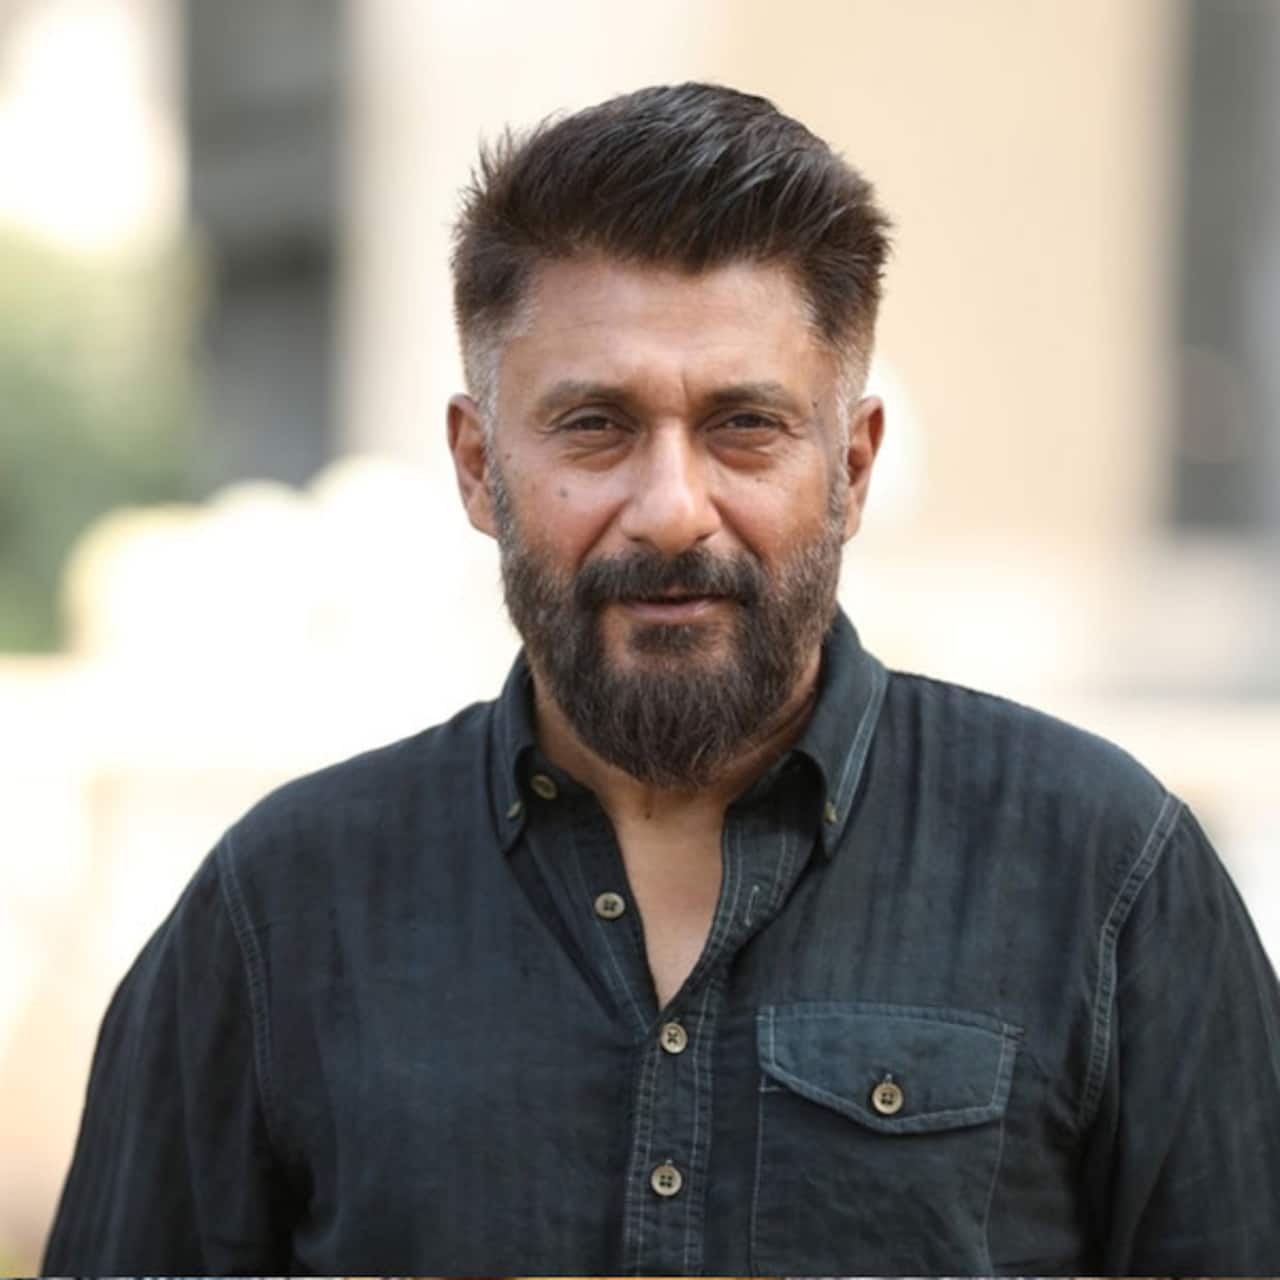 Amid The Kashmir Files IFFI controversy, director Vivek Agnihotri announces The Kashmir Files Unreported; says 'Wish to bring out the whole truth'